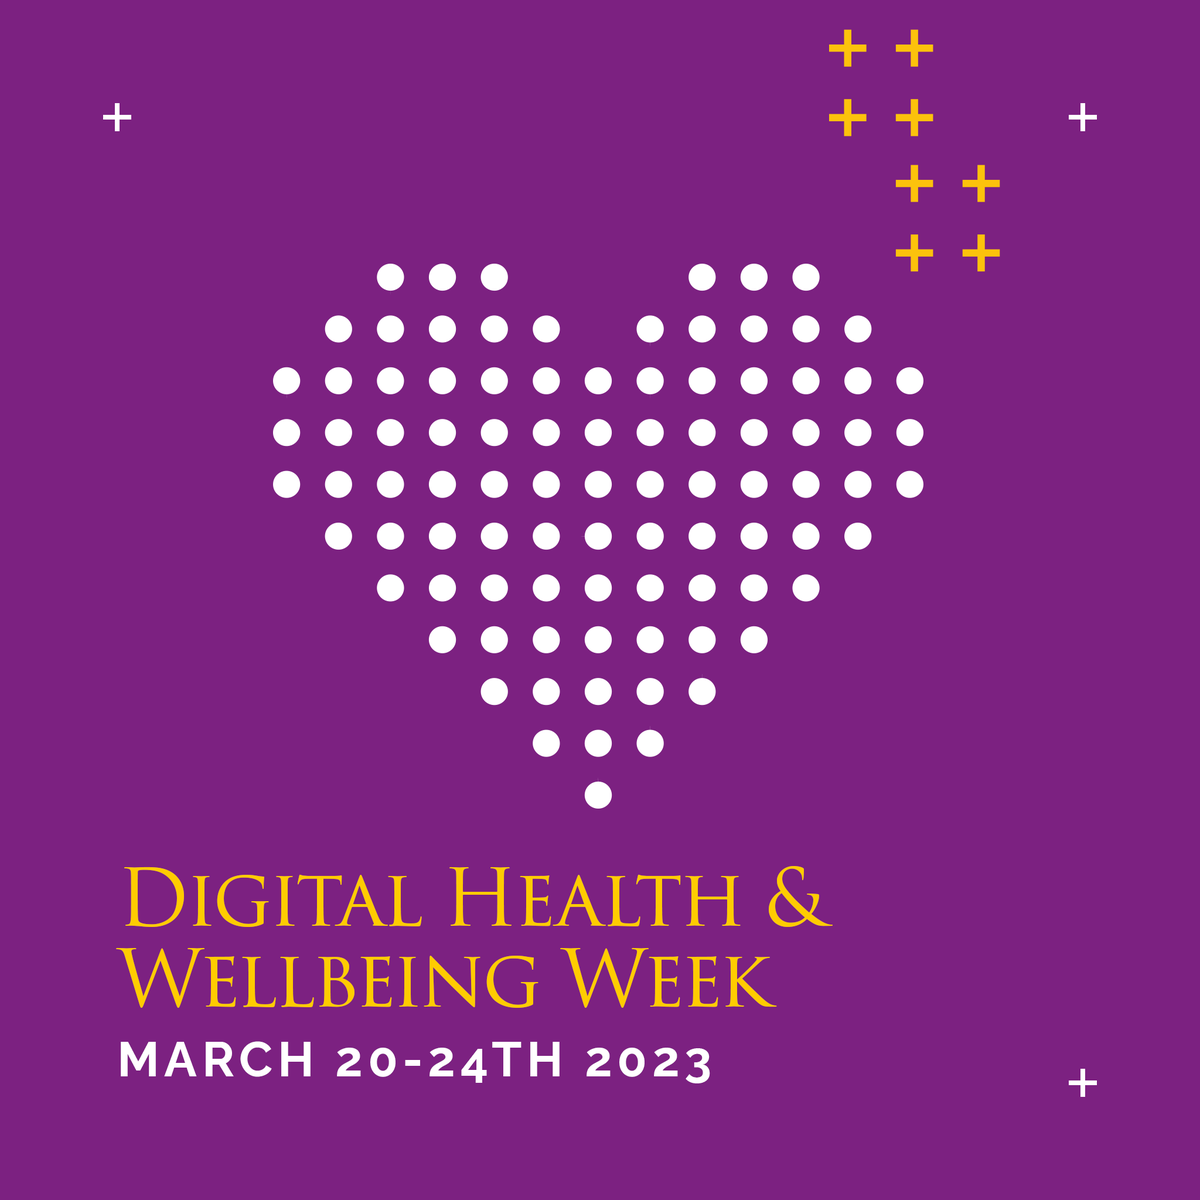 Digital Health at The University of Winchester (@UoW_DigiHealth) on Twitter photo 2023-02-17 08:31:52